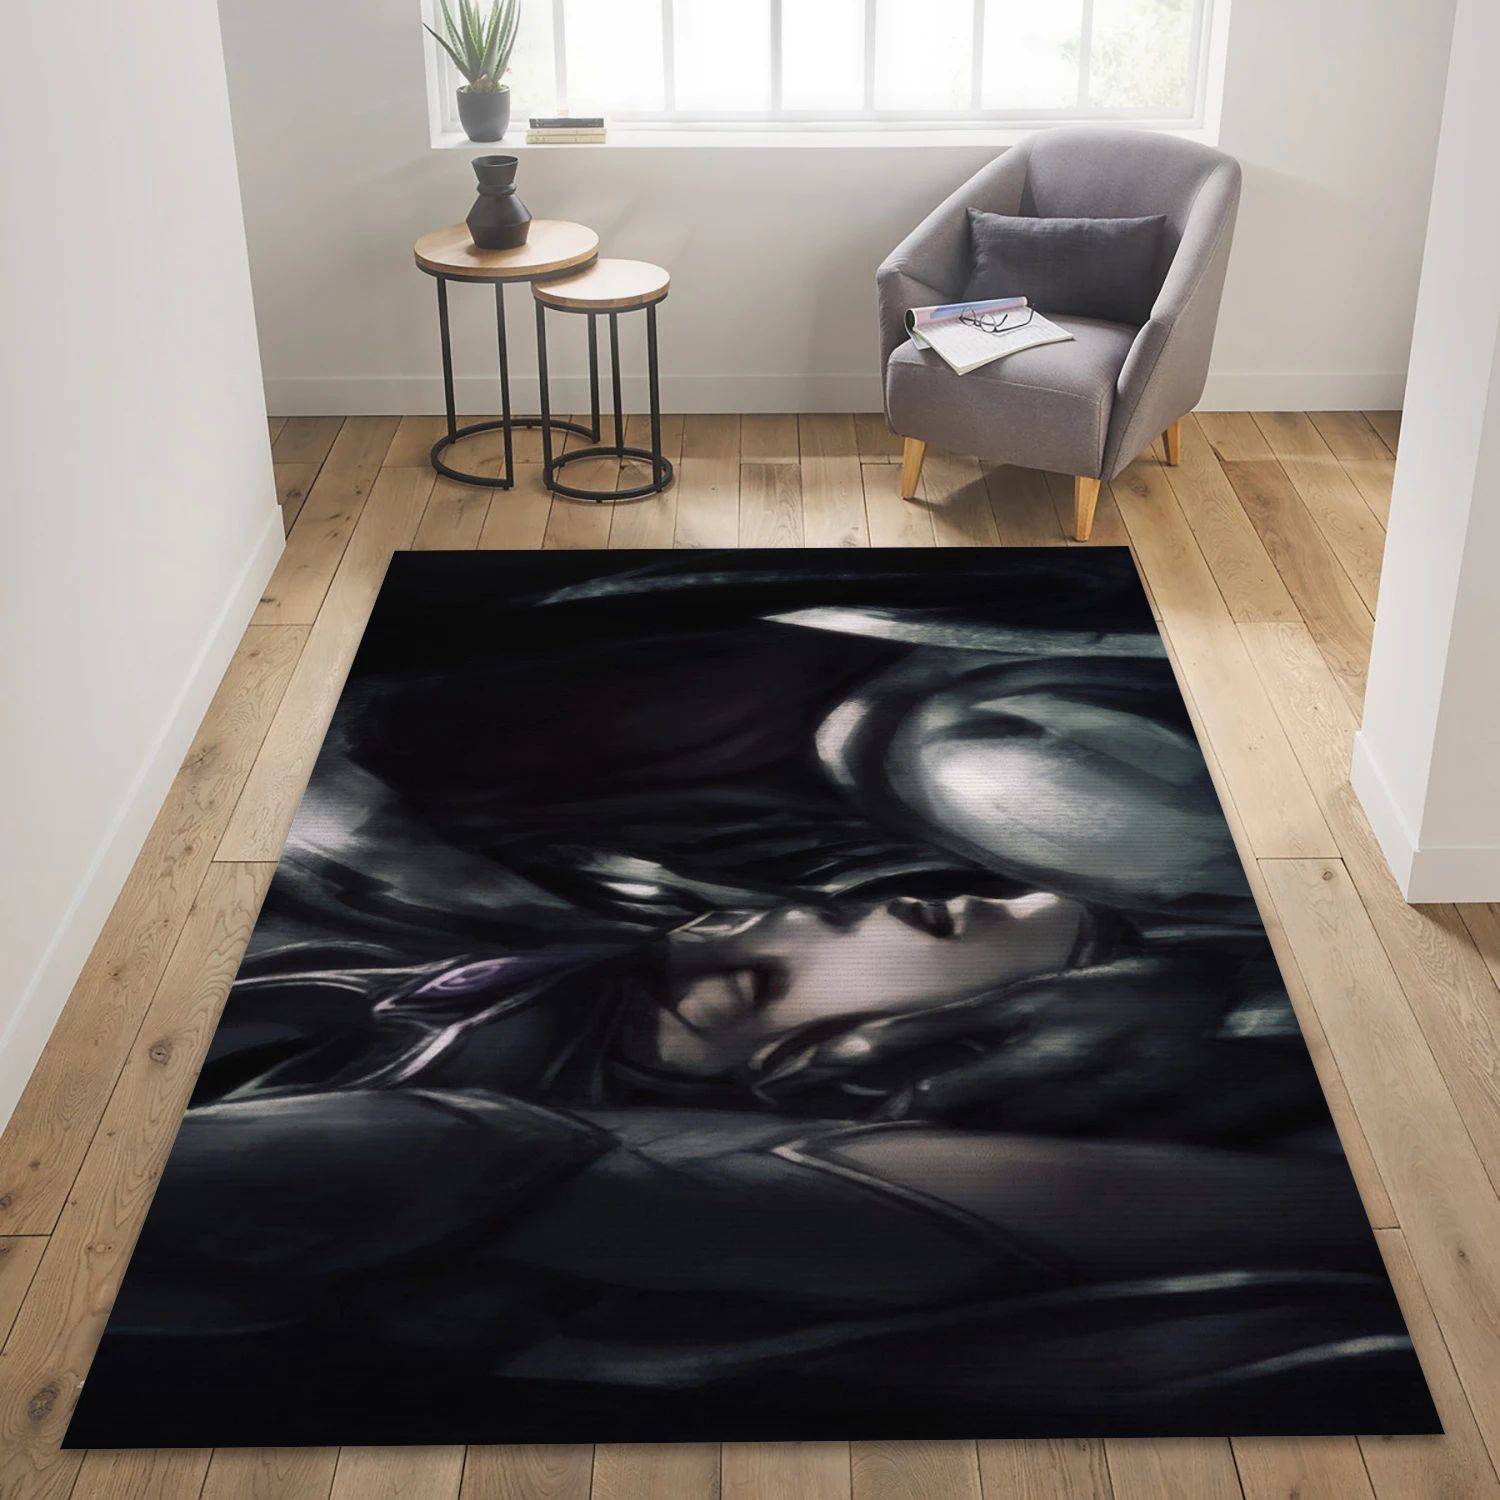 League Of Legends Video Game Area Rug For Christmas, Bedroom Rug - Home Decor Floor Decor - Indoor Outdoor Rugs 1